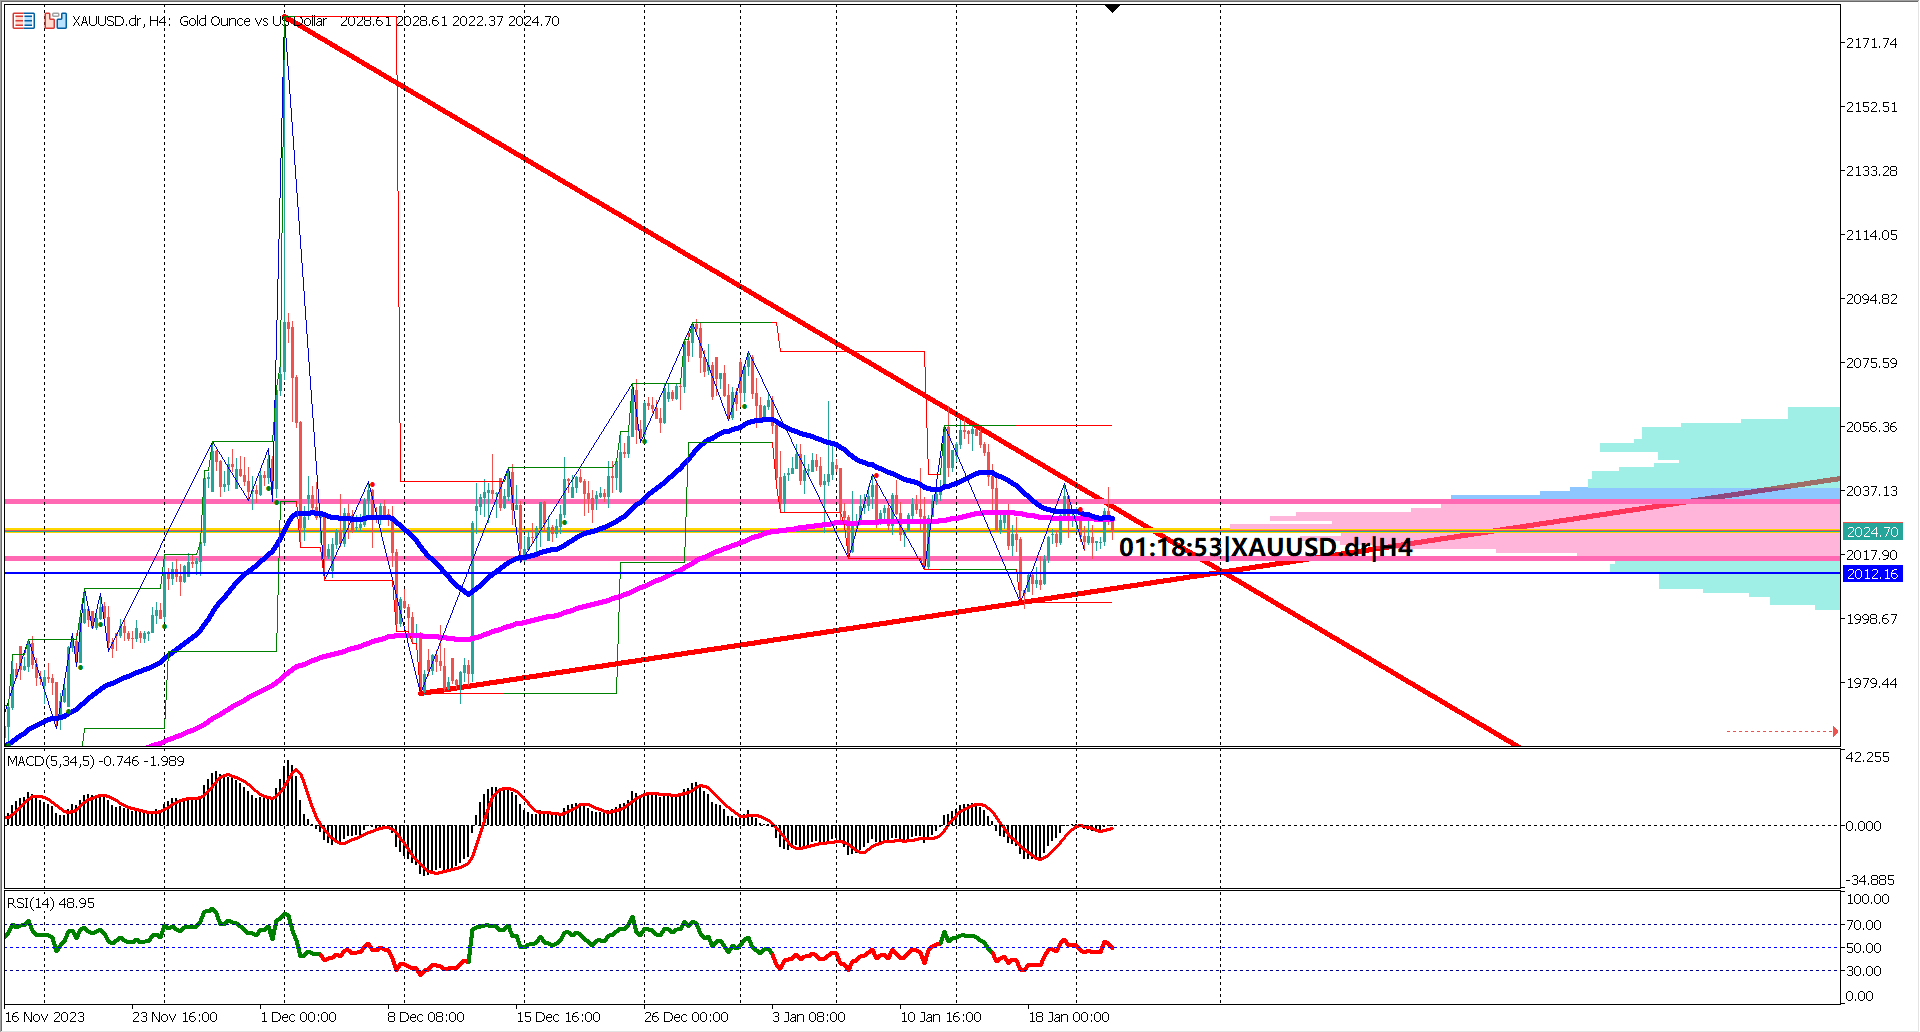 Gold's Coiled Spring: Will the Symmetrical Triangle Spring a Surprise?